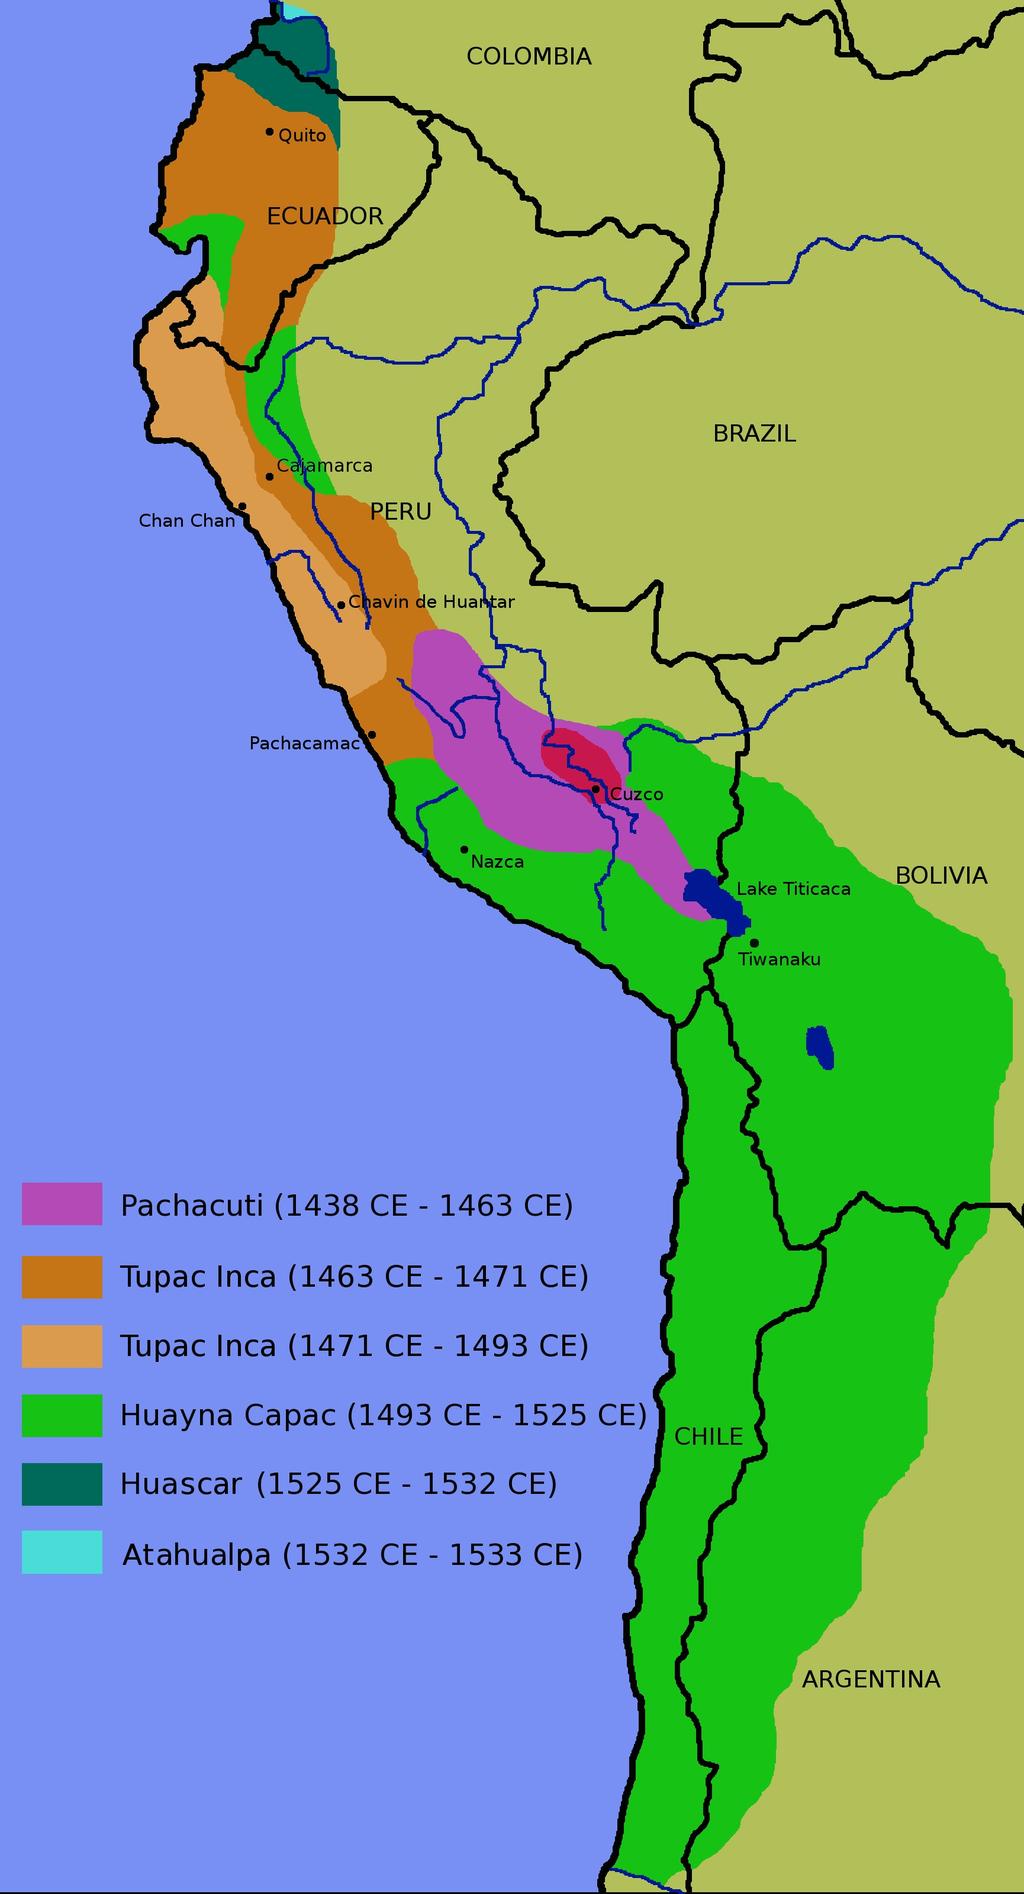 A regular census was taken and populations divided up into groups based on multiples of 10. Inca mathematics was almost identical to the system we use today.